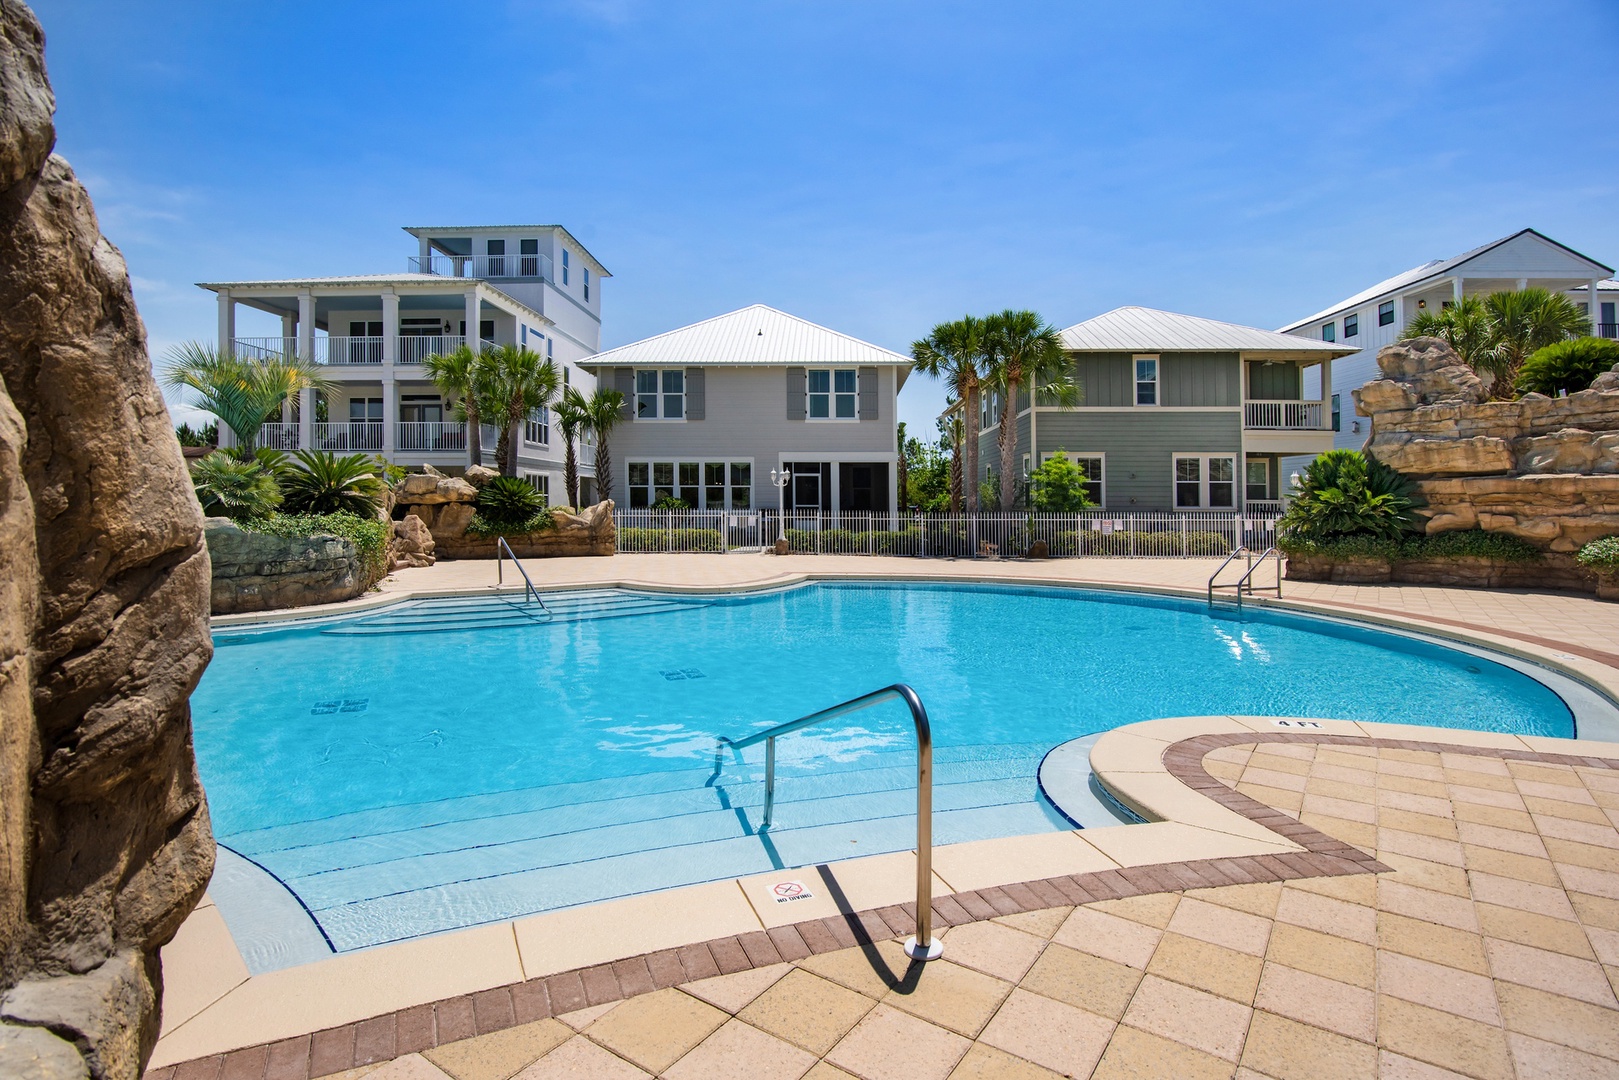 Directly on the pool with private access!